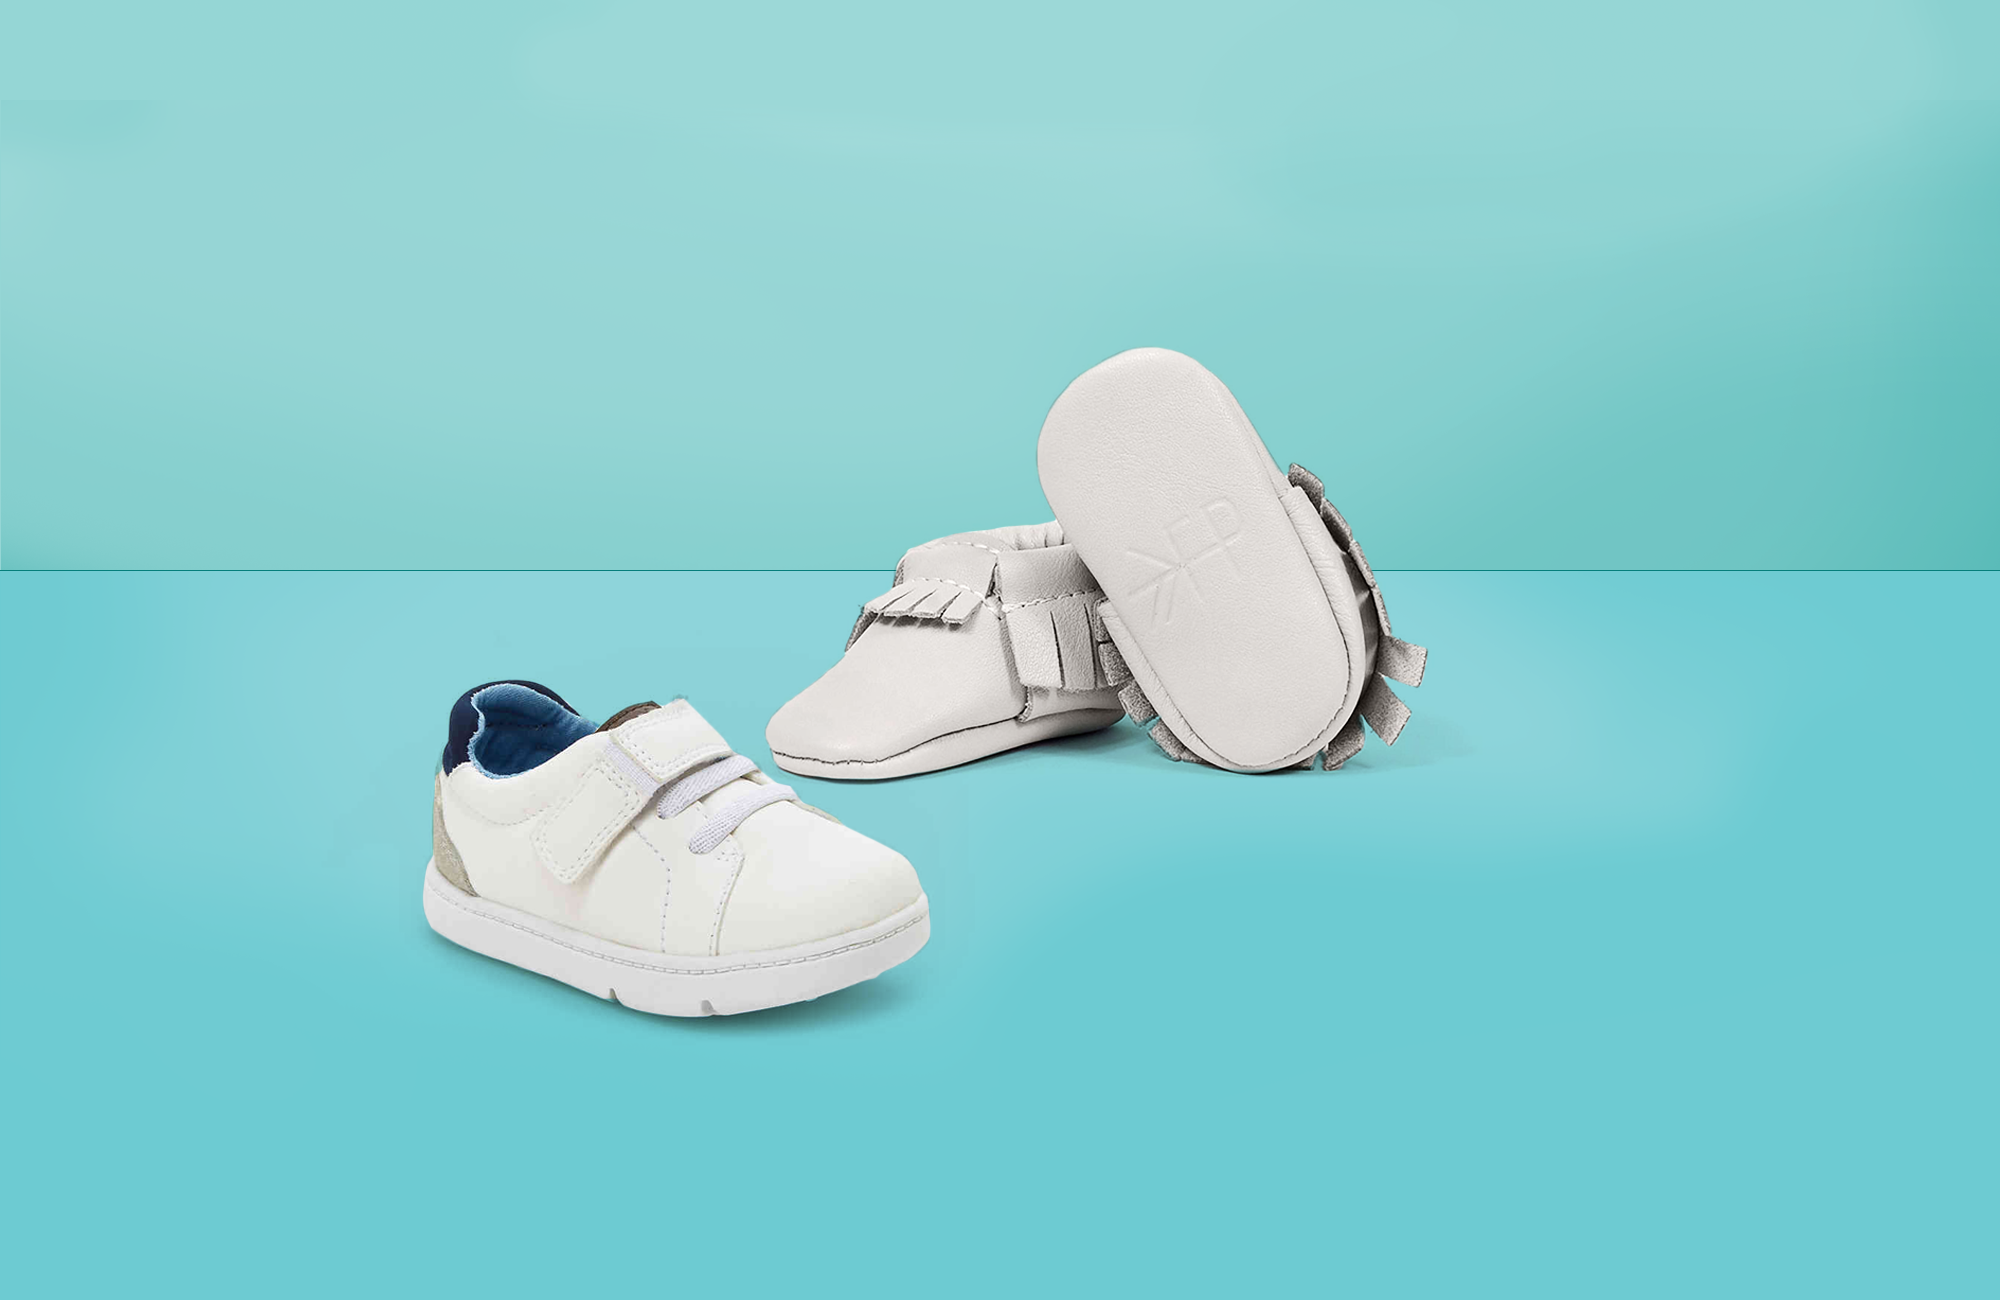 wide fit baby sandals